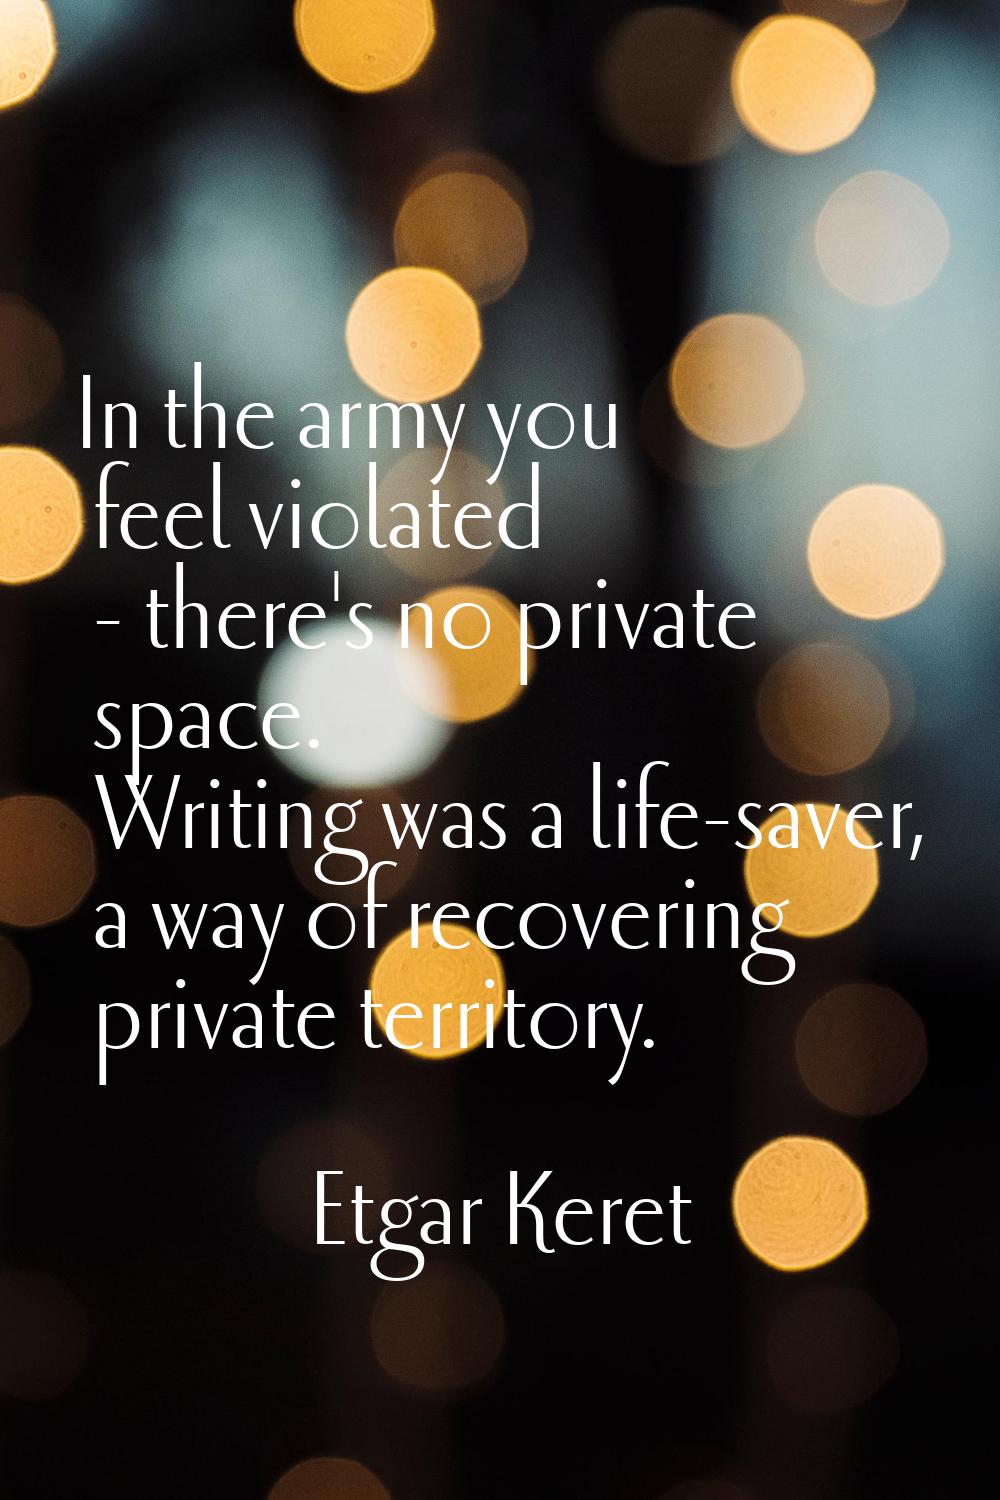 In the army you feel violated - there's no private space. Writing was a life-saver, a way of recove